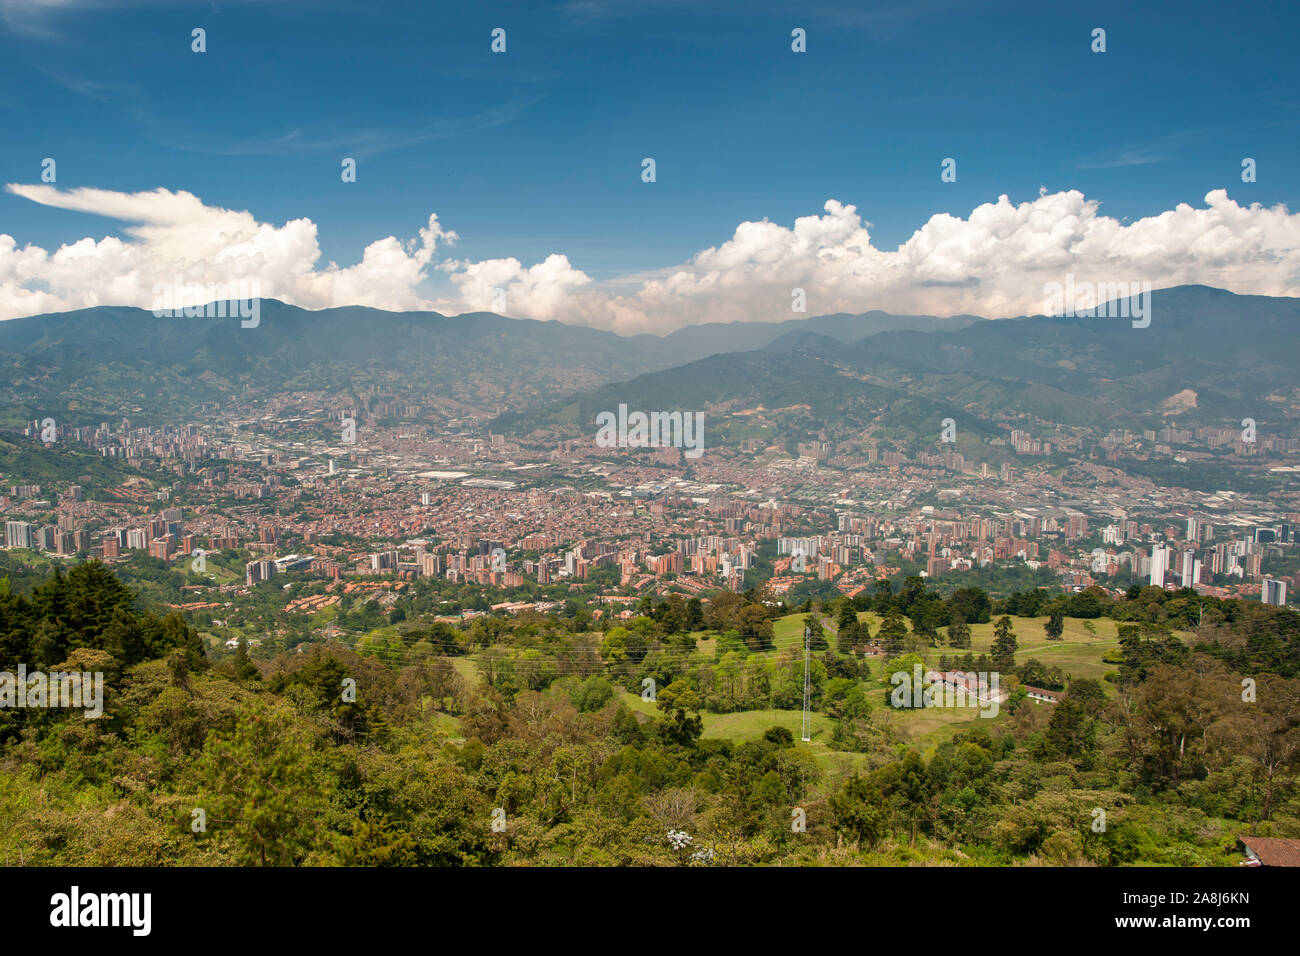 View of the city of Medellin, Colombia. Stock Photo